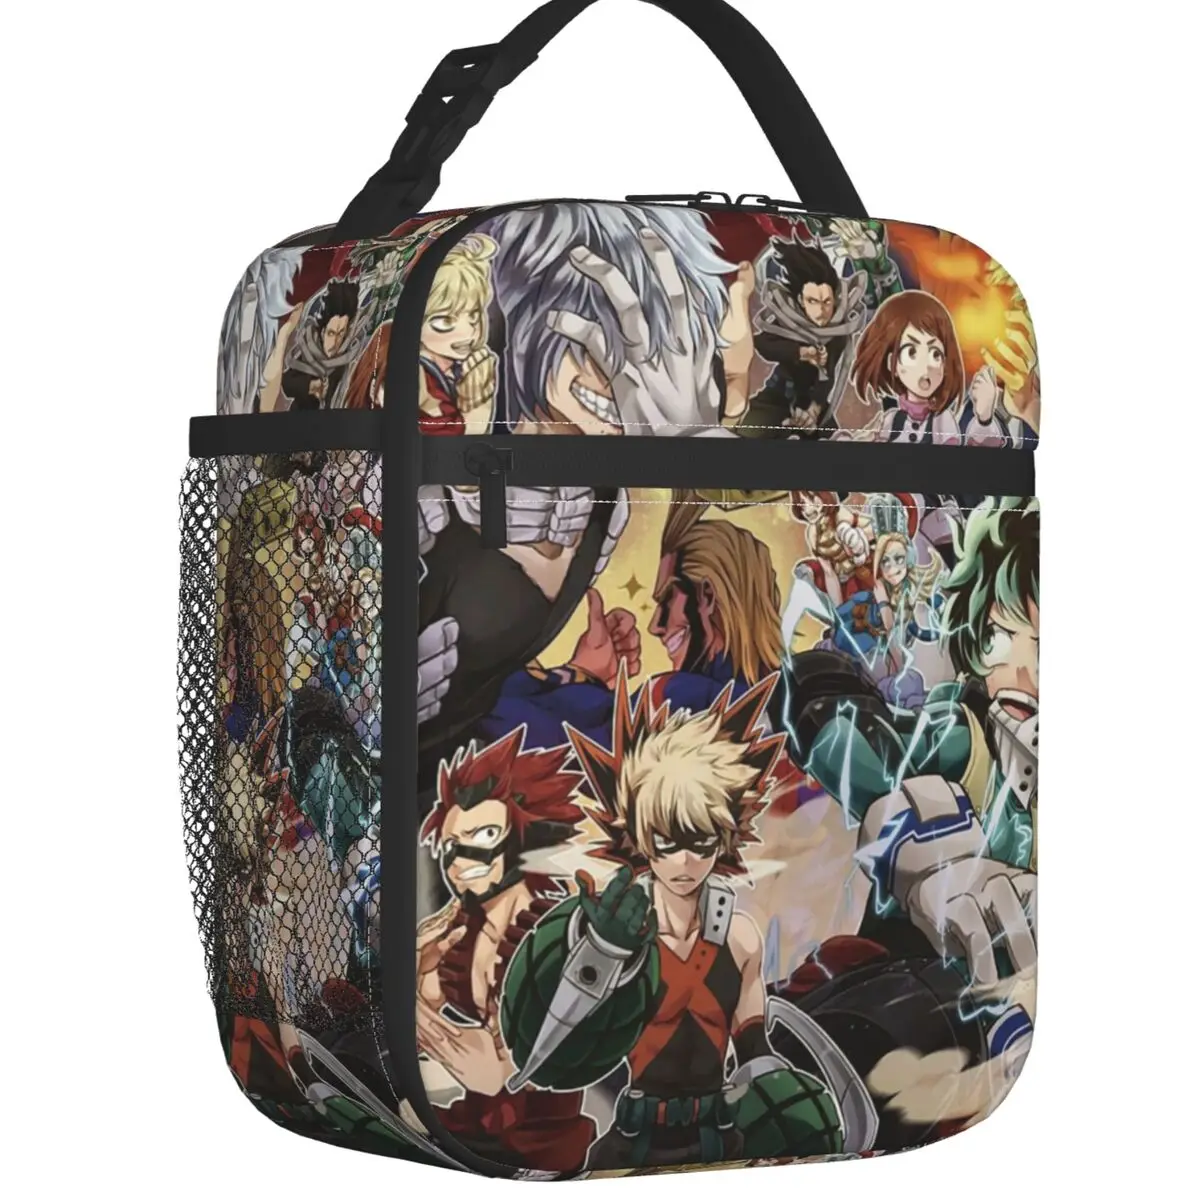 My Hero Academia Anime Manga Insulated Lunch Bags Women MHA All For One Resuable Thermal Cooler Bento Box Outdoor Camping Travel